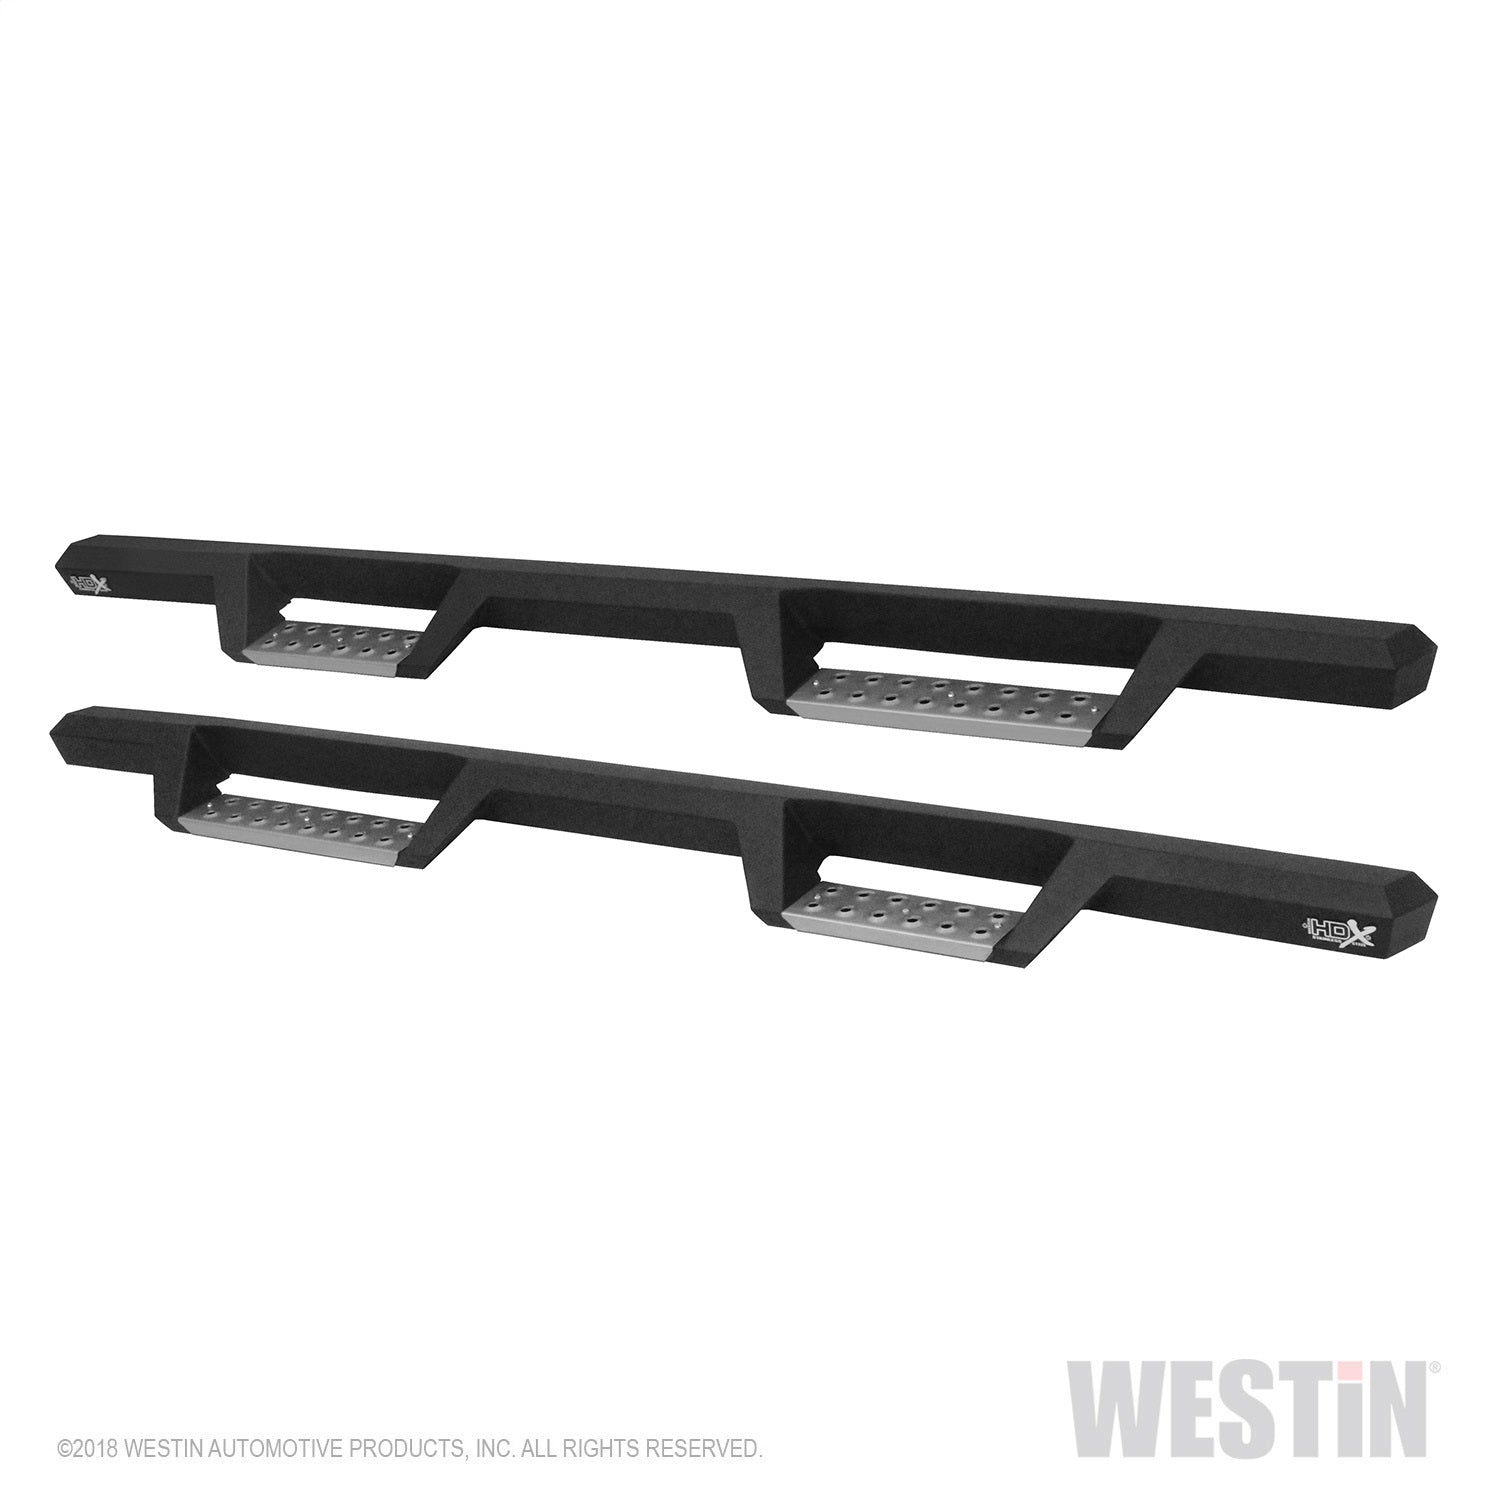 Westin 56-137252 HDX Stainless Drop Nerf Step Bars